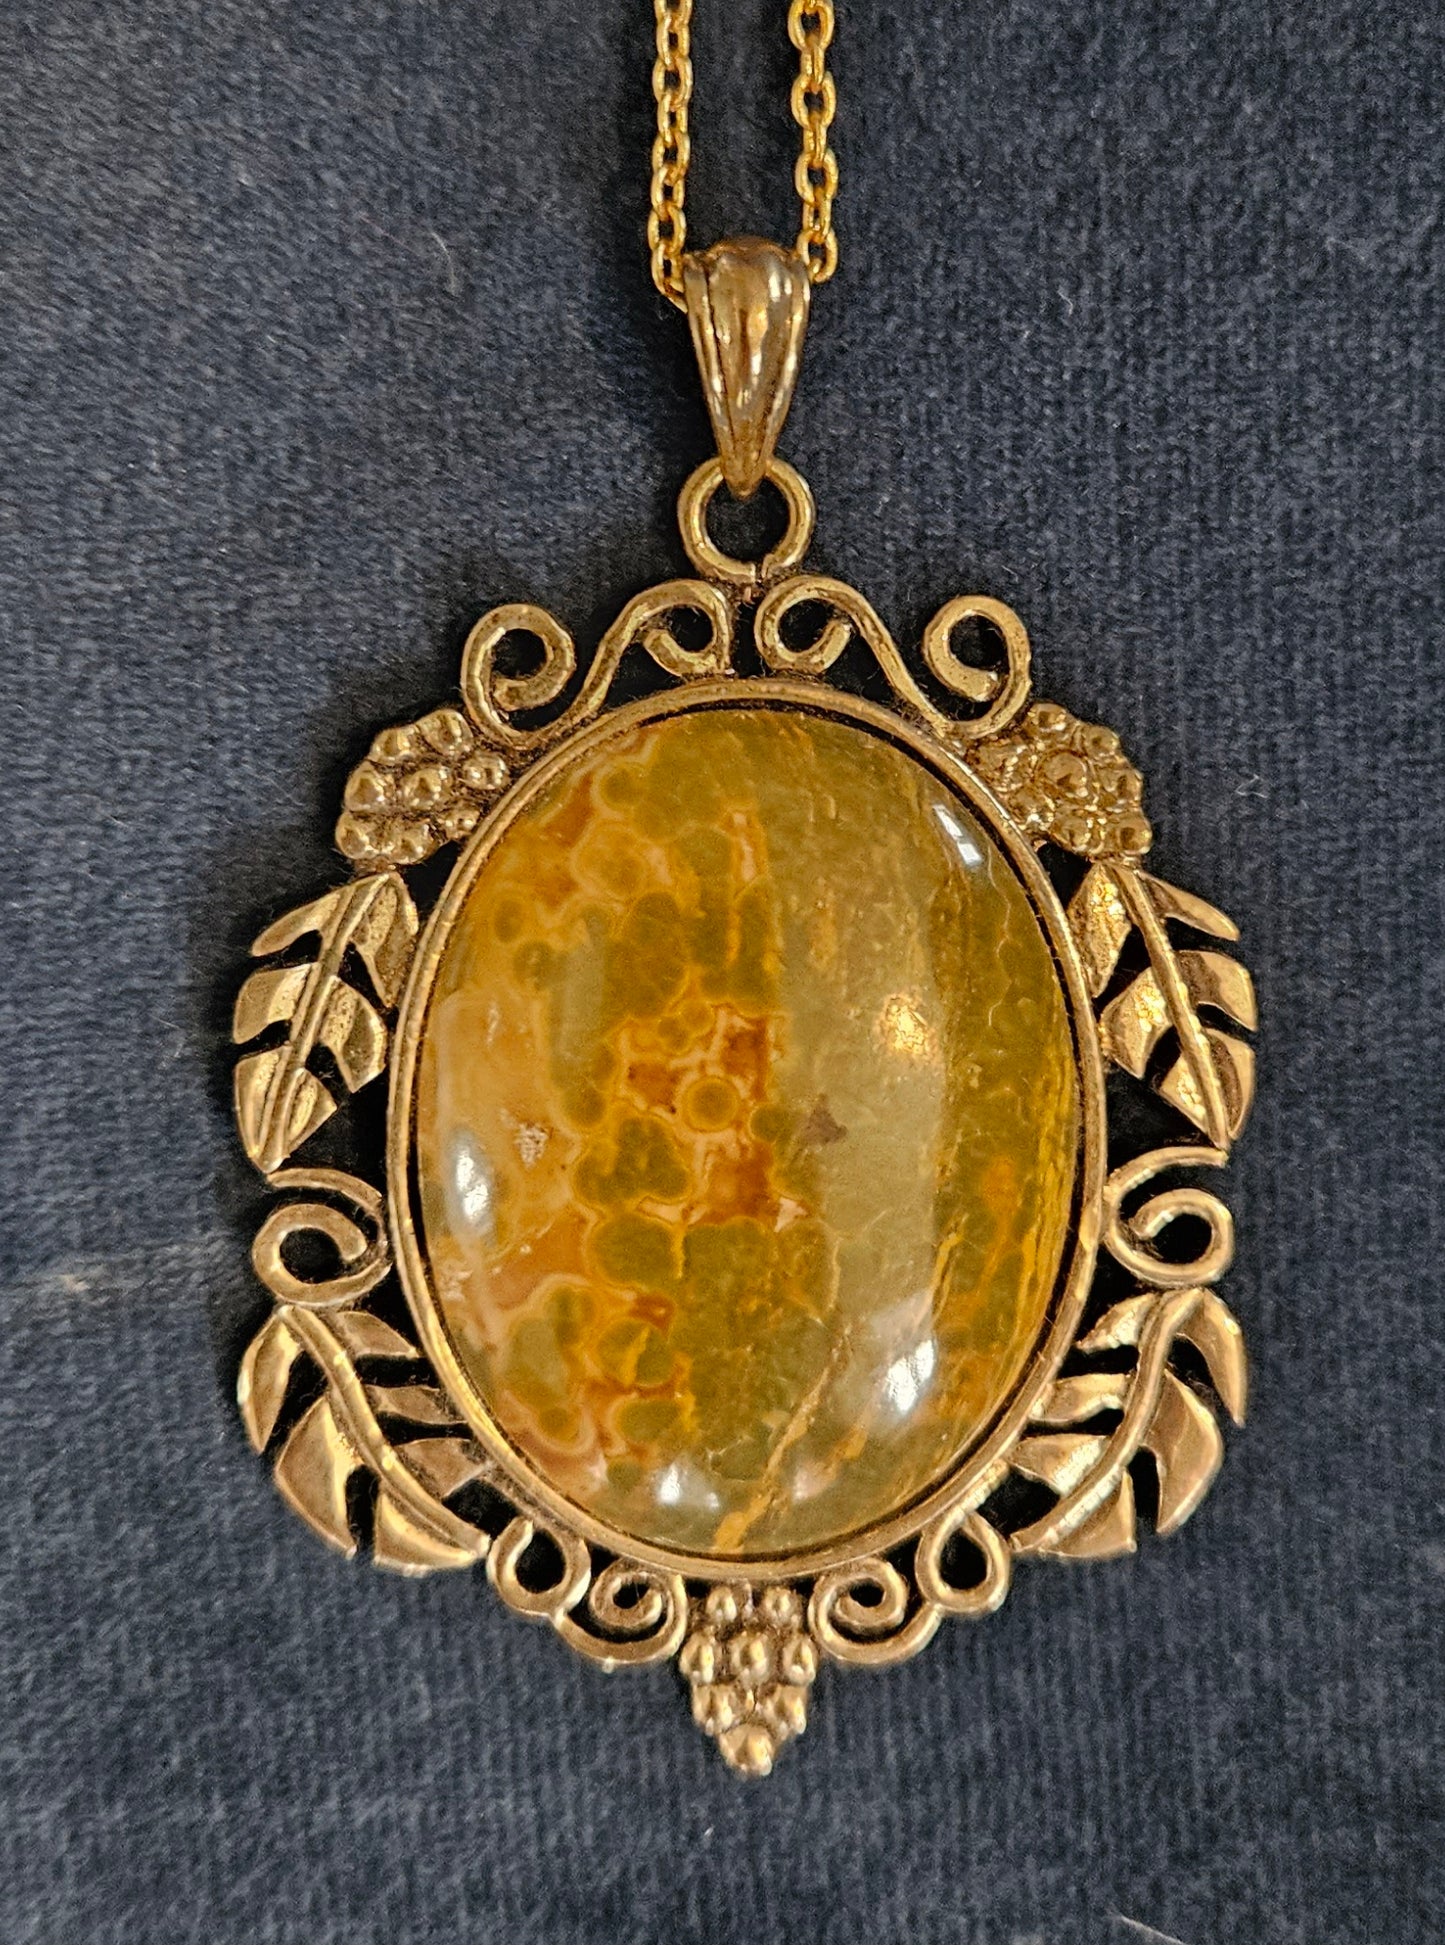 Necklace with Polagonite Jasper collected from Canterbury, South Island New Zealand by a friend of mine and hand polished into a 40x30mm cabochon, set in a gold plated setting with 19 inch chain. This stone shows both the characteristic patterns of this stone of green and yellow dots as well as the stripe pattern. 